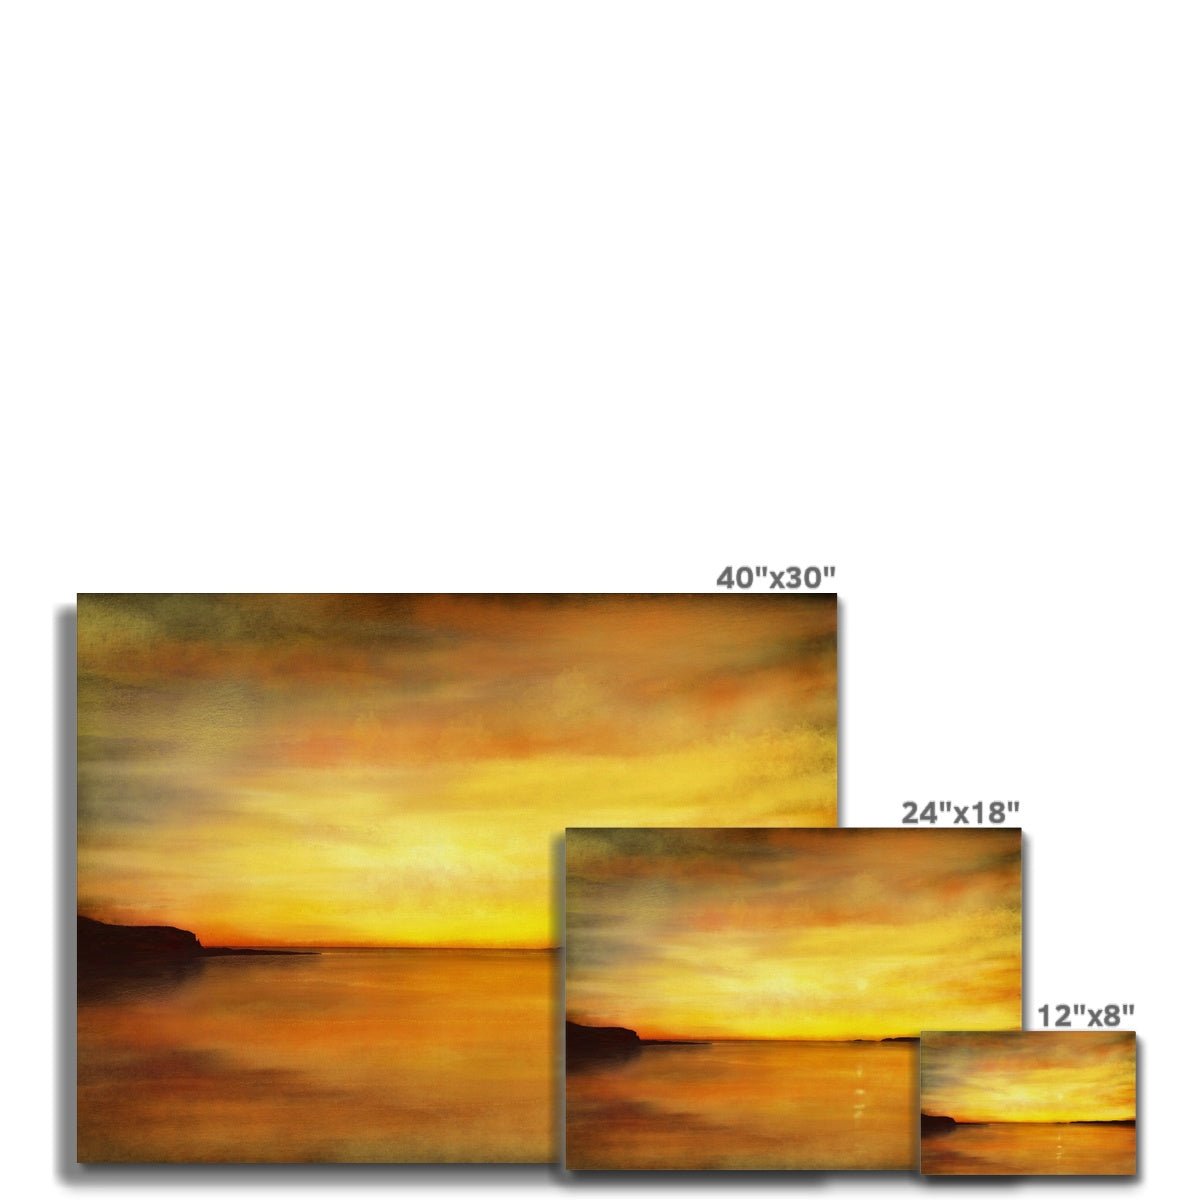 King's Cave Sunset Arran Painting | Canvas From Scotland-Contemporary Stretched Canvas Prints-Arran Art Gallery-Paintings, Prints, Homeware, Art Gifts From Scotland By Scottish Artist Kevin Hunter